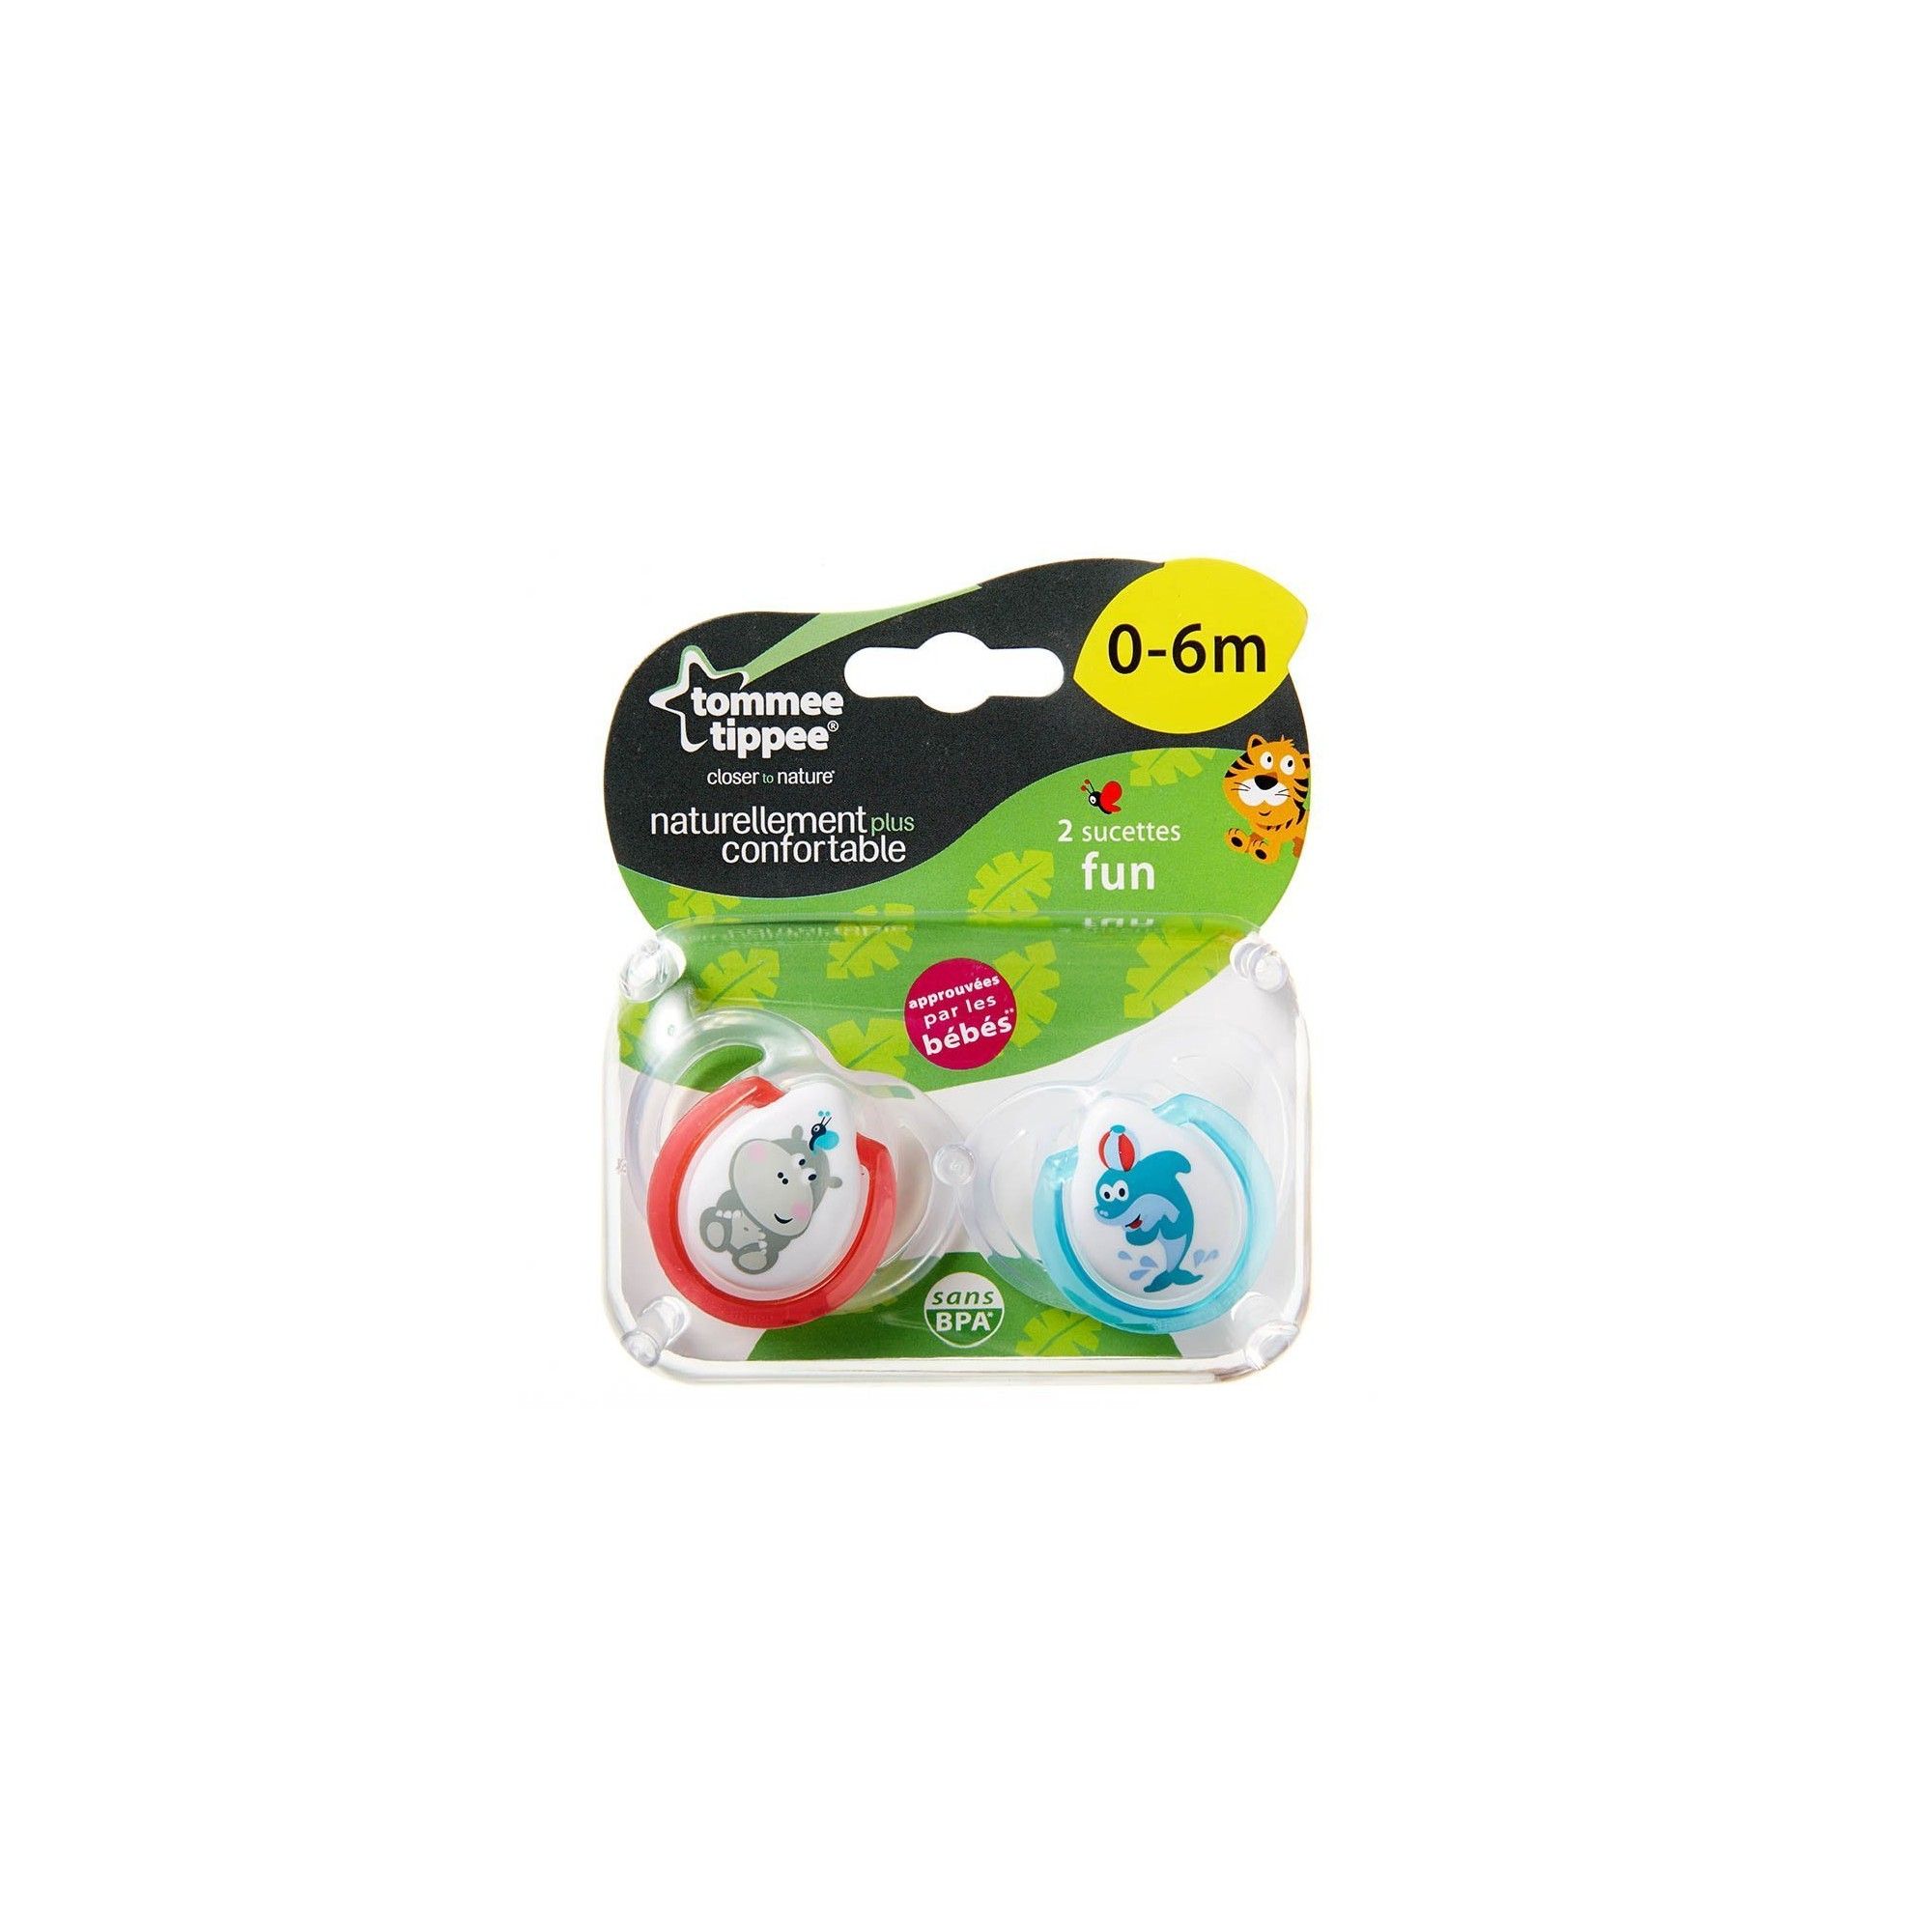 2 sucettes Fun, Tommee Tippee de Tommee Tippee